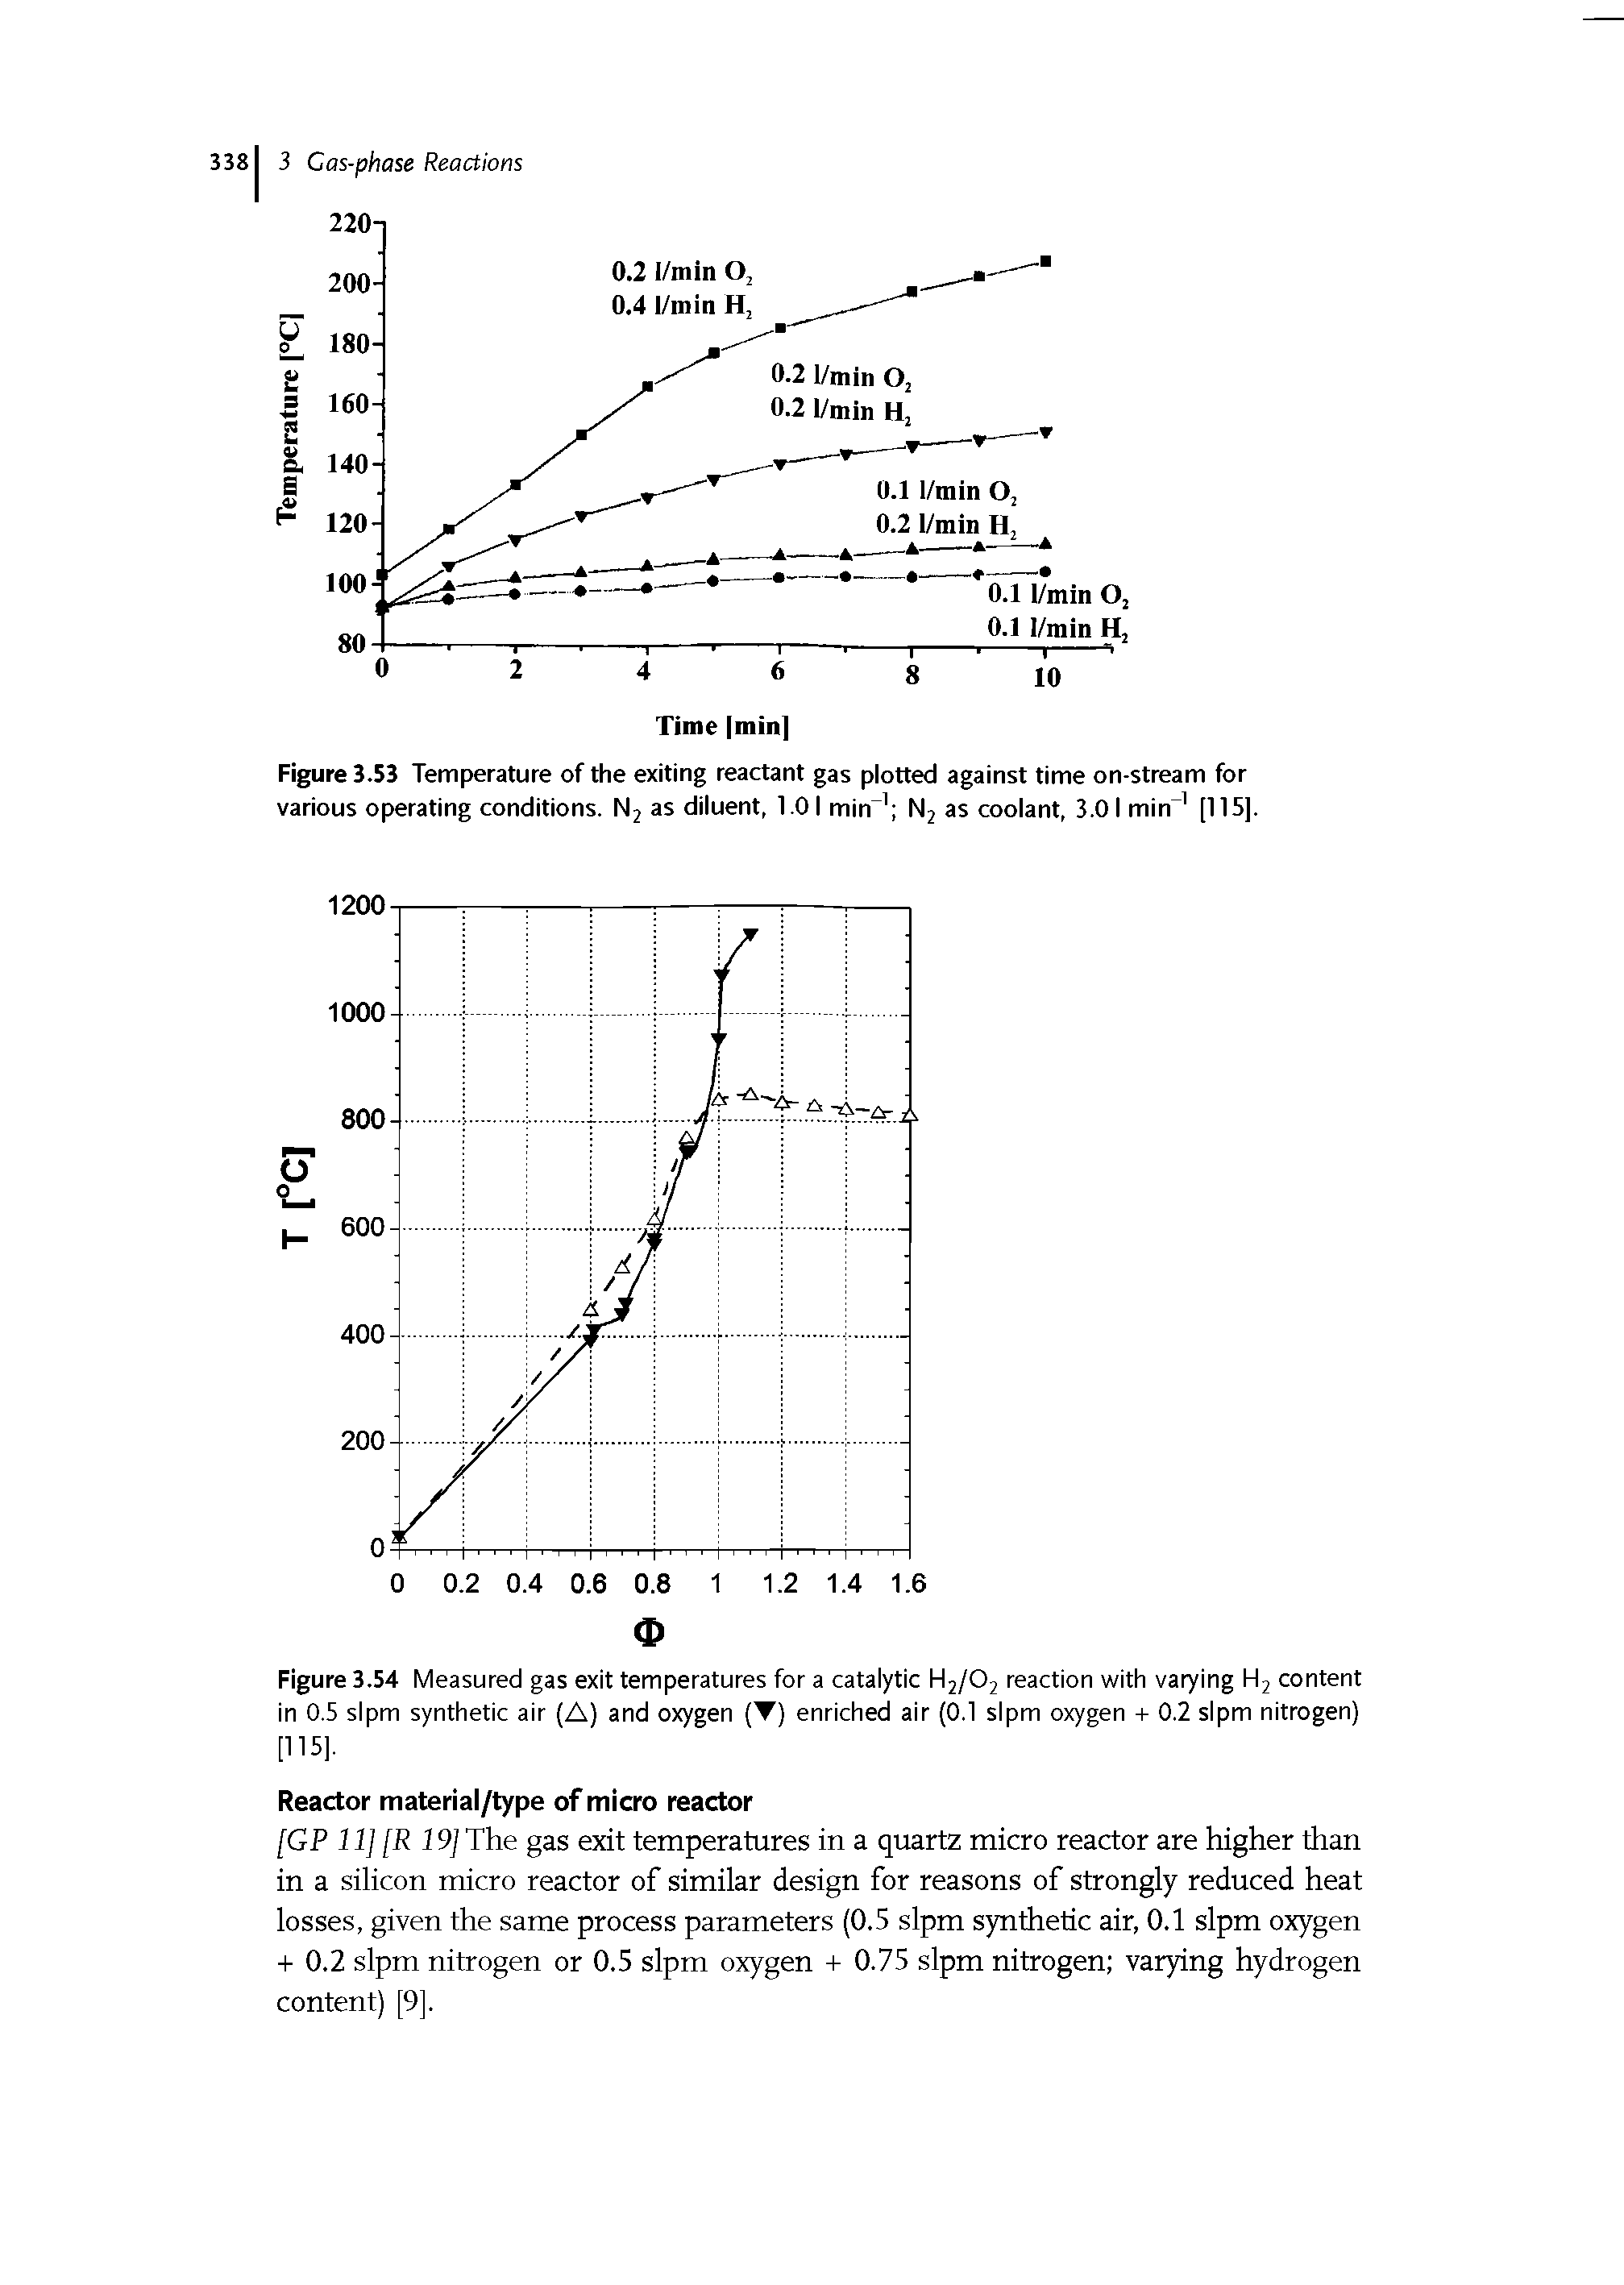 Figure 3.54 Measured gas exit temperatures for a catalytic H2/O2 reaction with varying H2 content in 0.5 sipm synthetic air (A) and oxygen (T) enriched air (0.1 sipm oxygen -r 0.2 sipm nitrogen) [115].